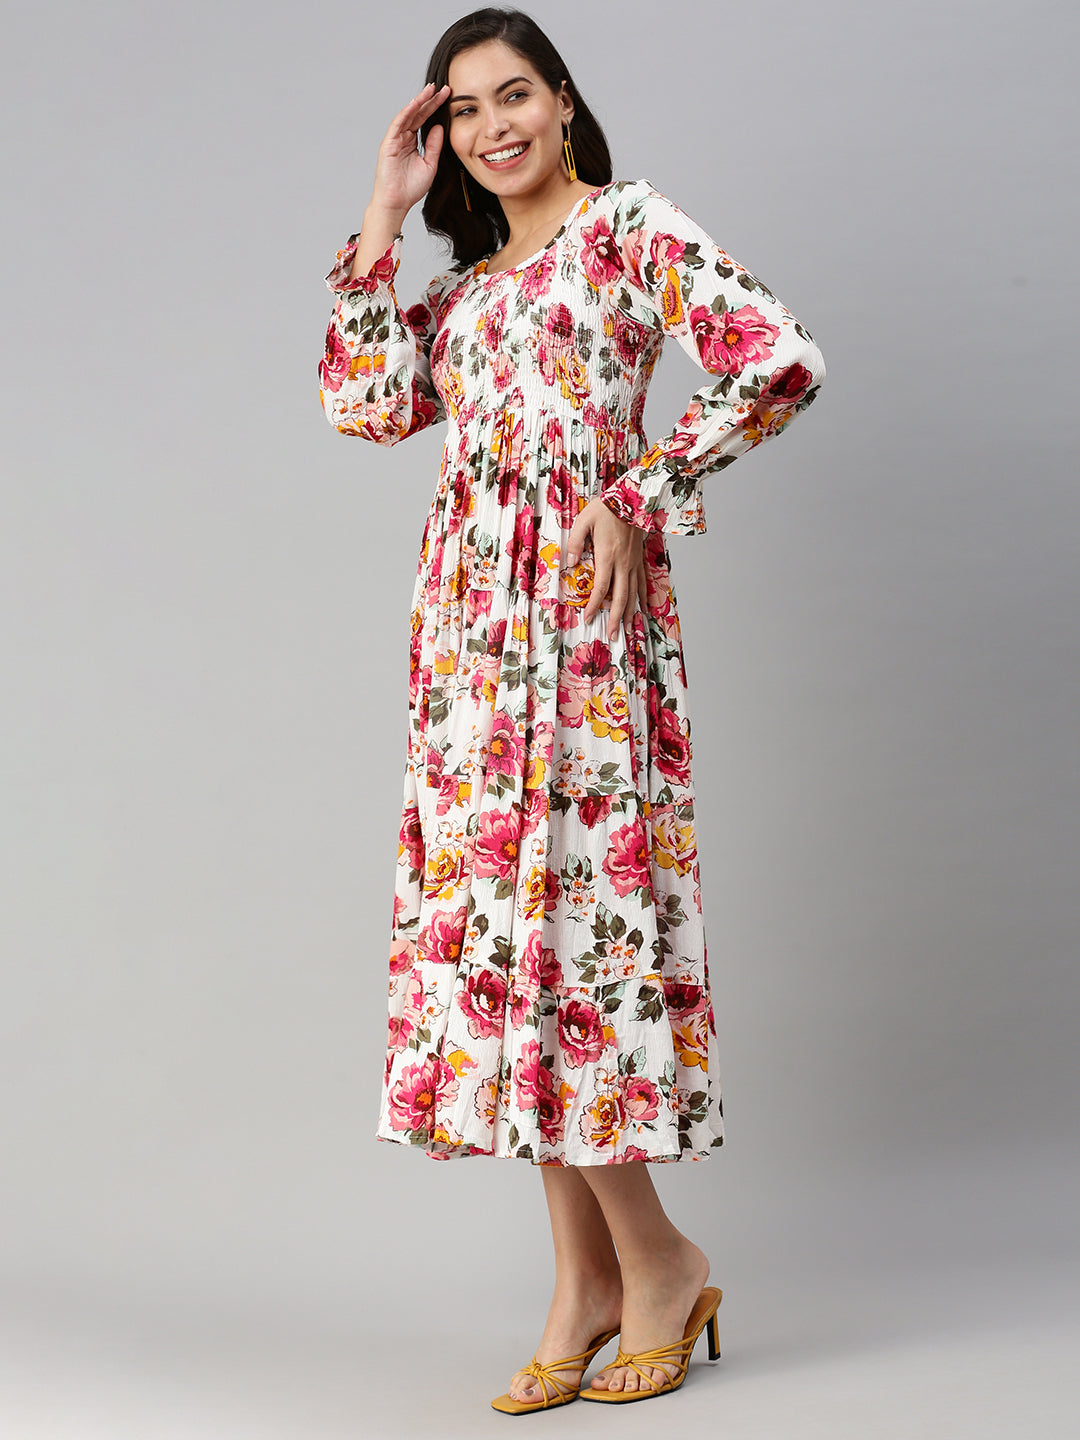 Women's Floral White Fit and Flare Dress